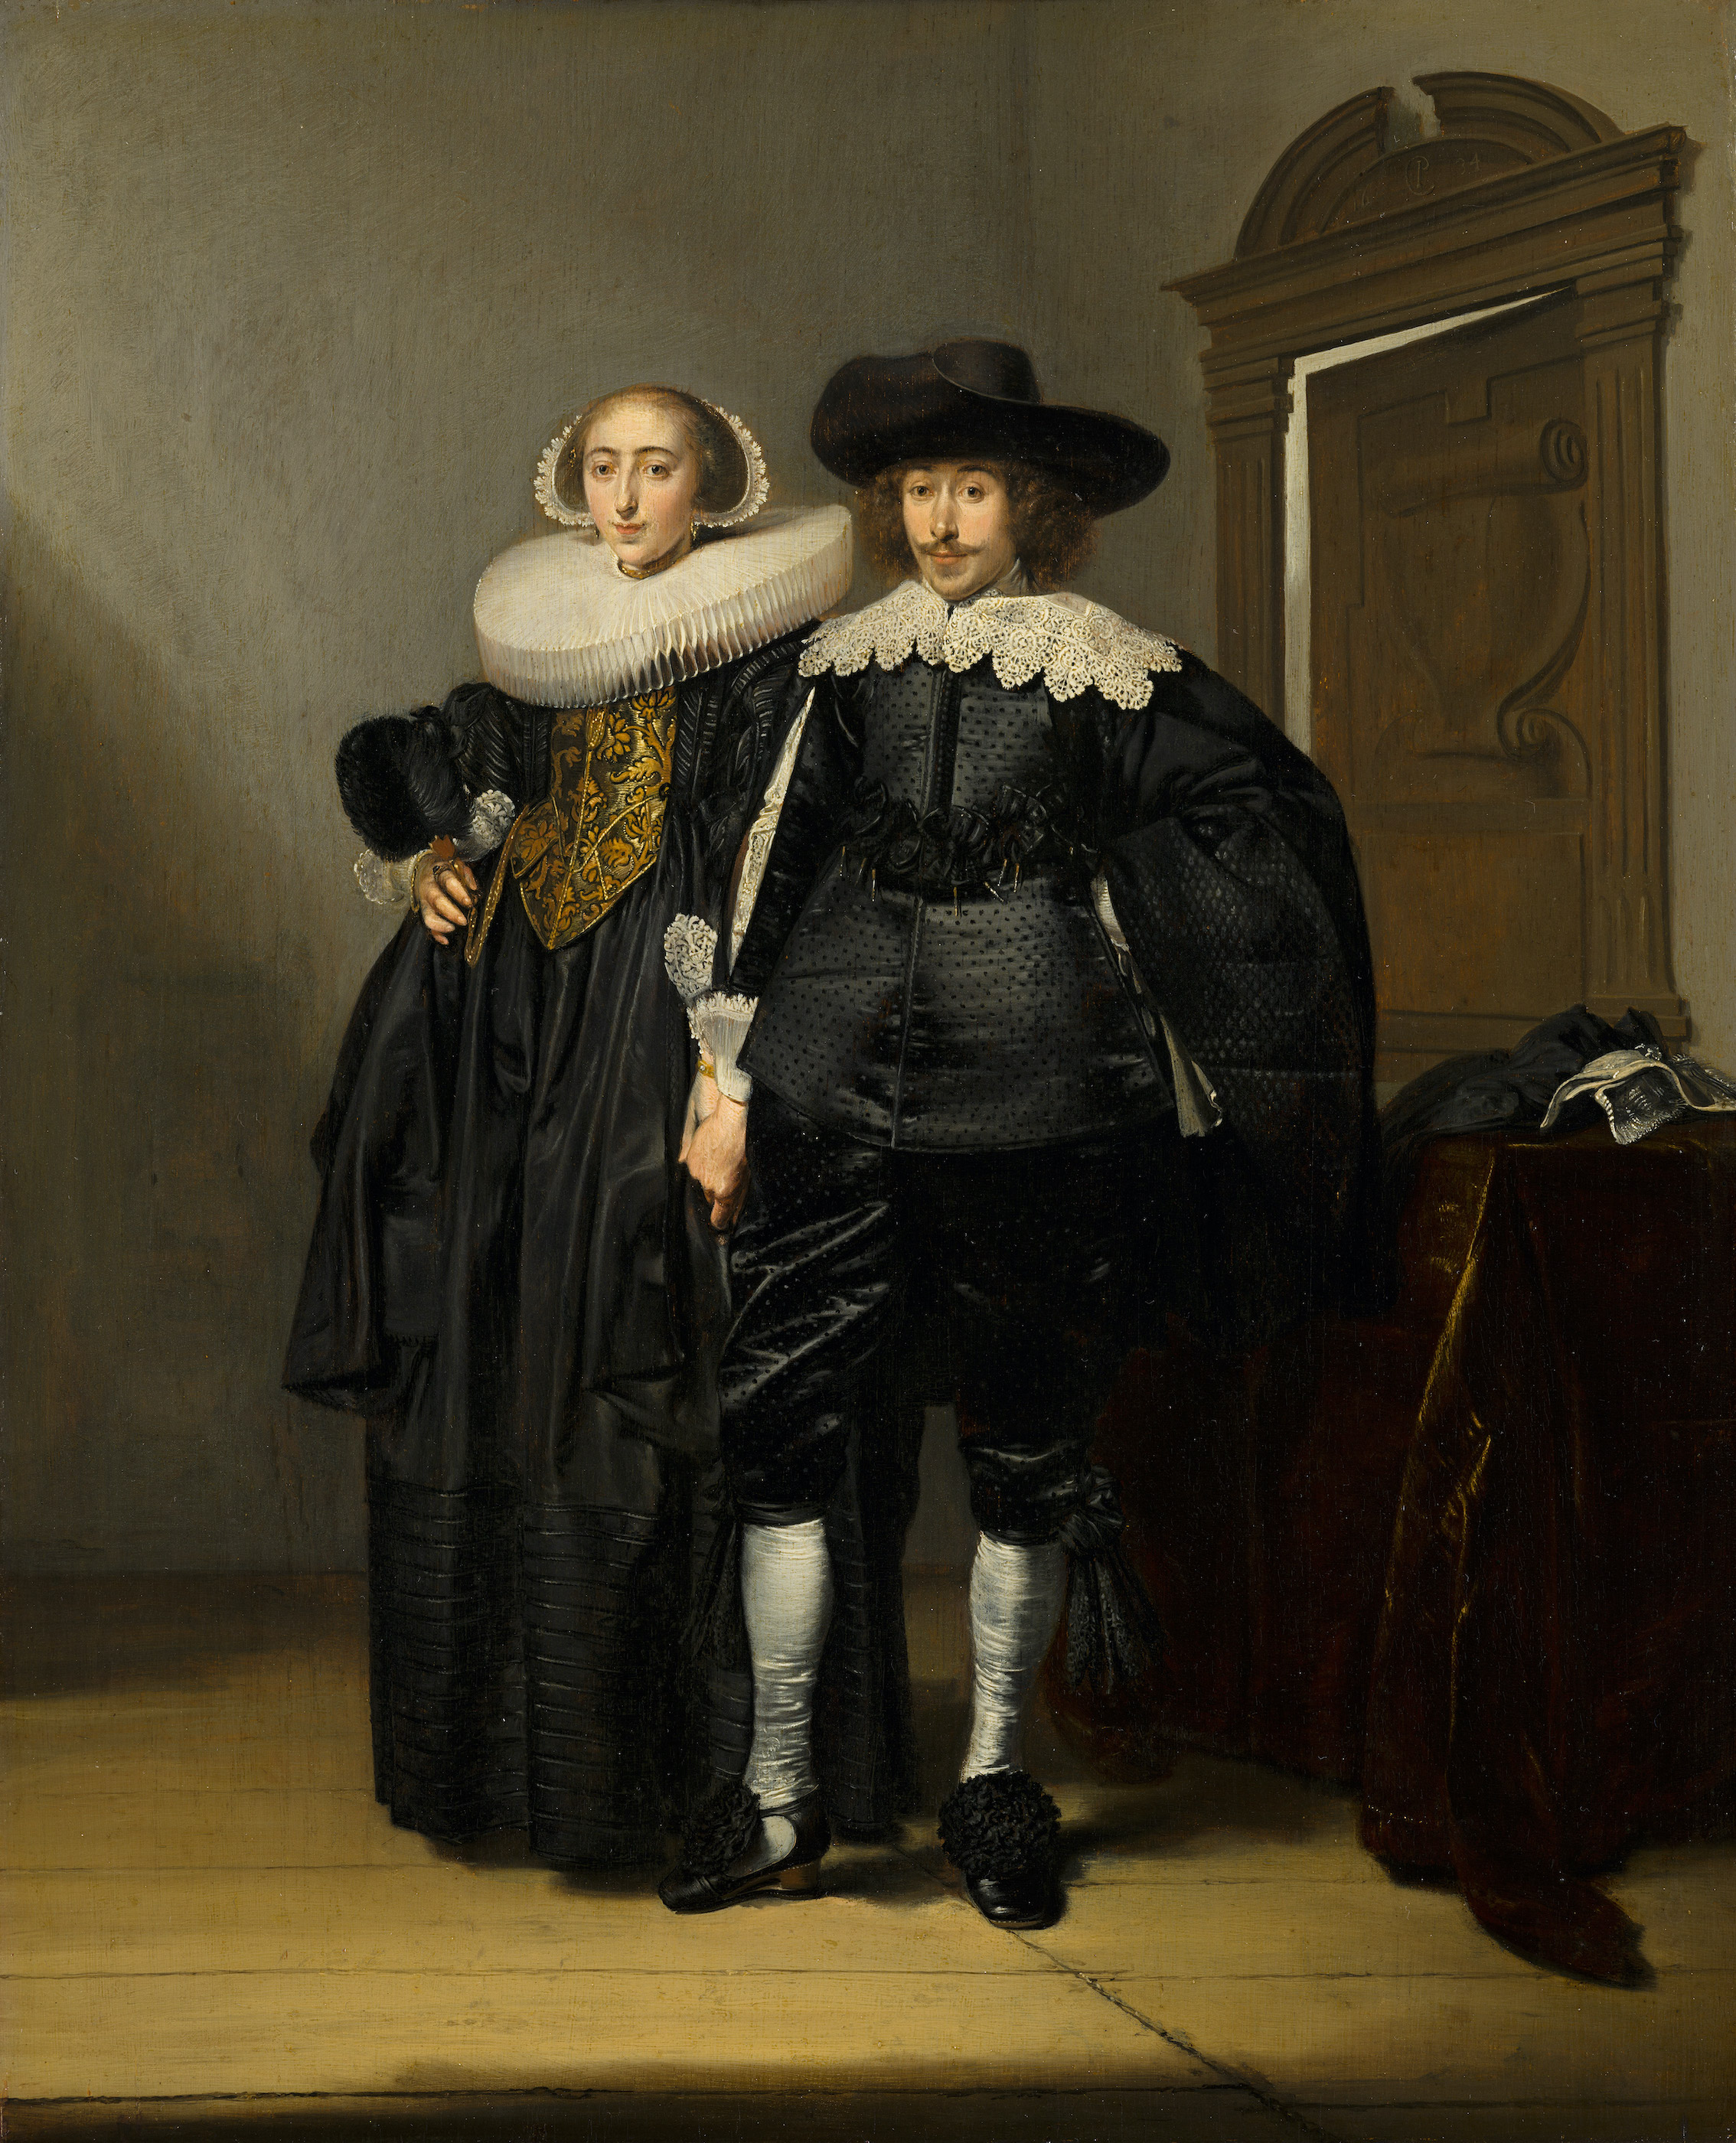 Portrait of a Married Couple by Pieter Codde - 1634 - 43 x 35 cm Mauritshuis, The Hague